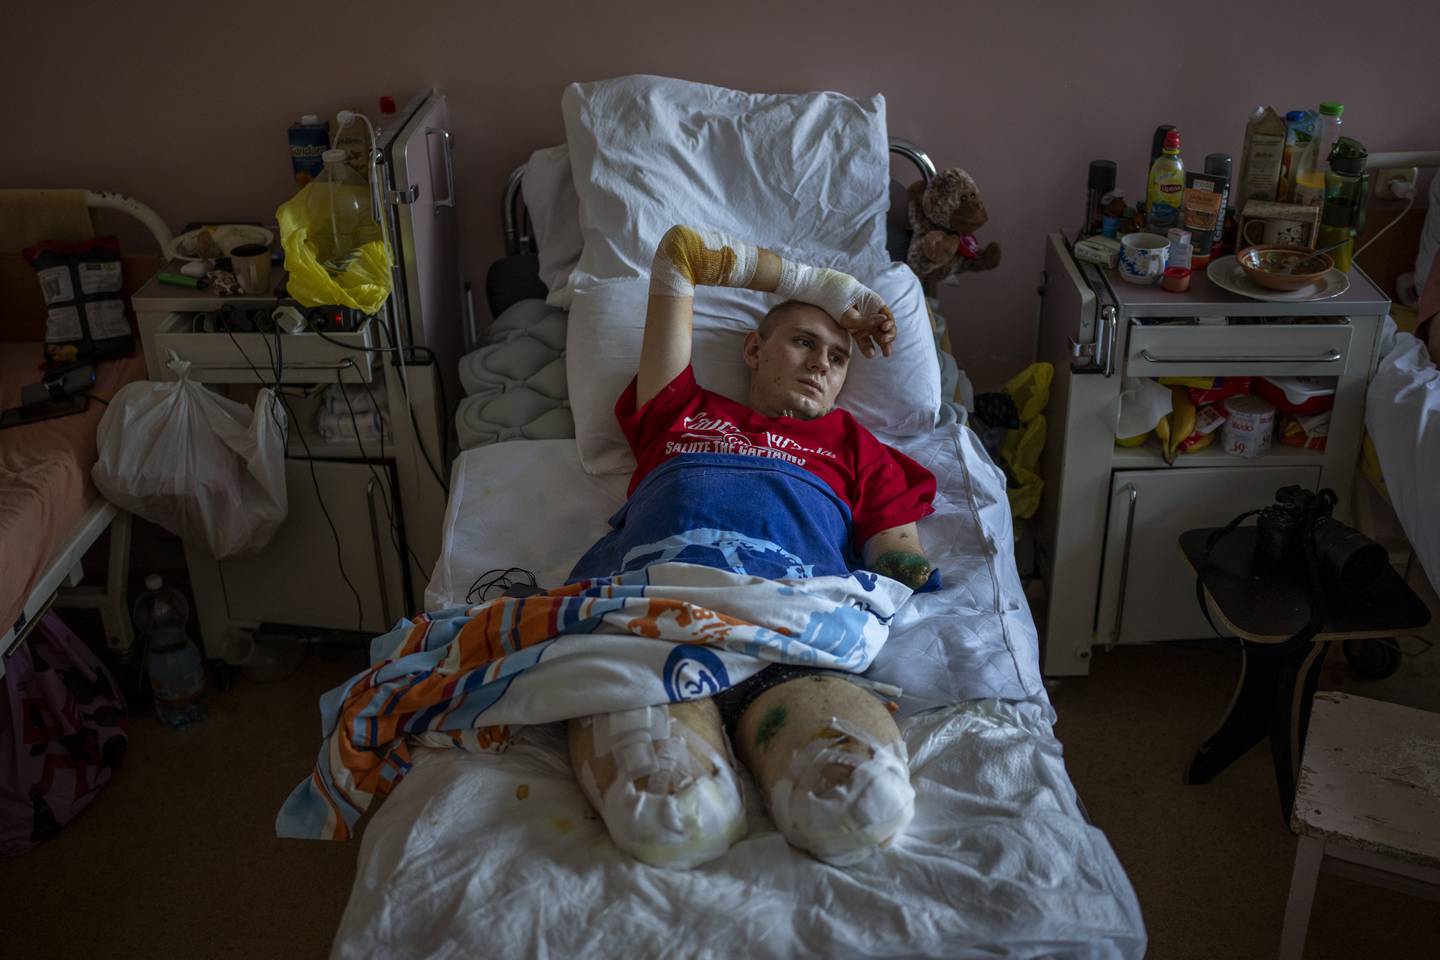 Anton Gladun, 22, lies on his bed at the Third City Hospital, in Cherkasy, Ukraine, Thursday, May 5, 2022. Anton, a military medic deployed on the front lines in eastern Ukraine, lost both legs and the left arm due to a mine explosion on March 27. (AP Photo/Emilio Morenatti)